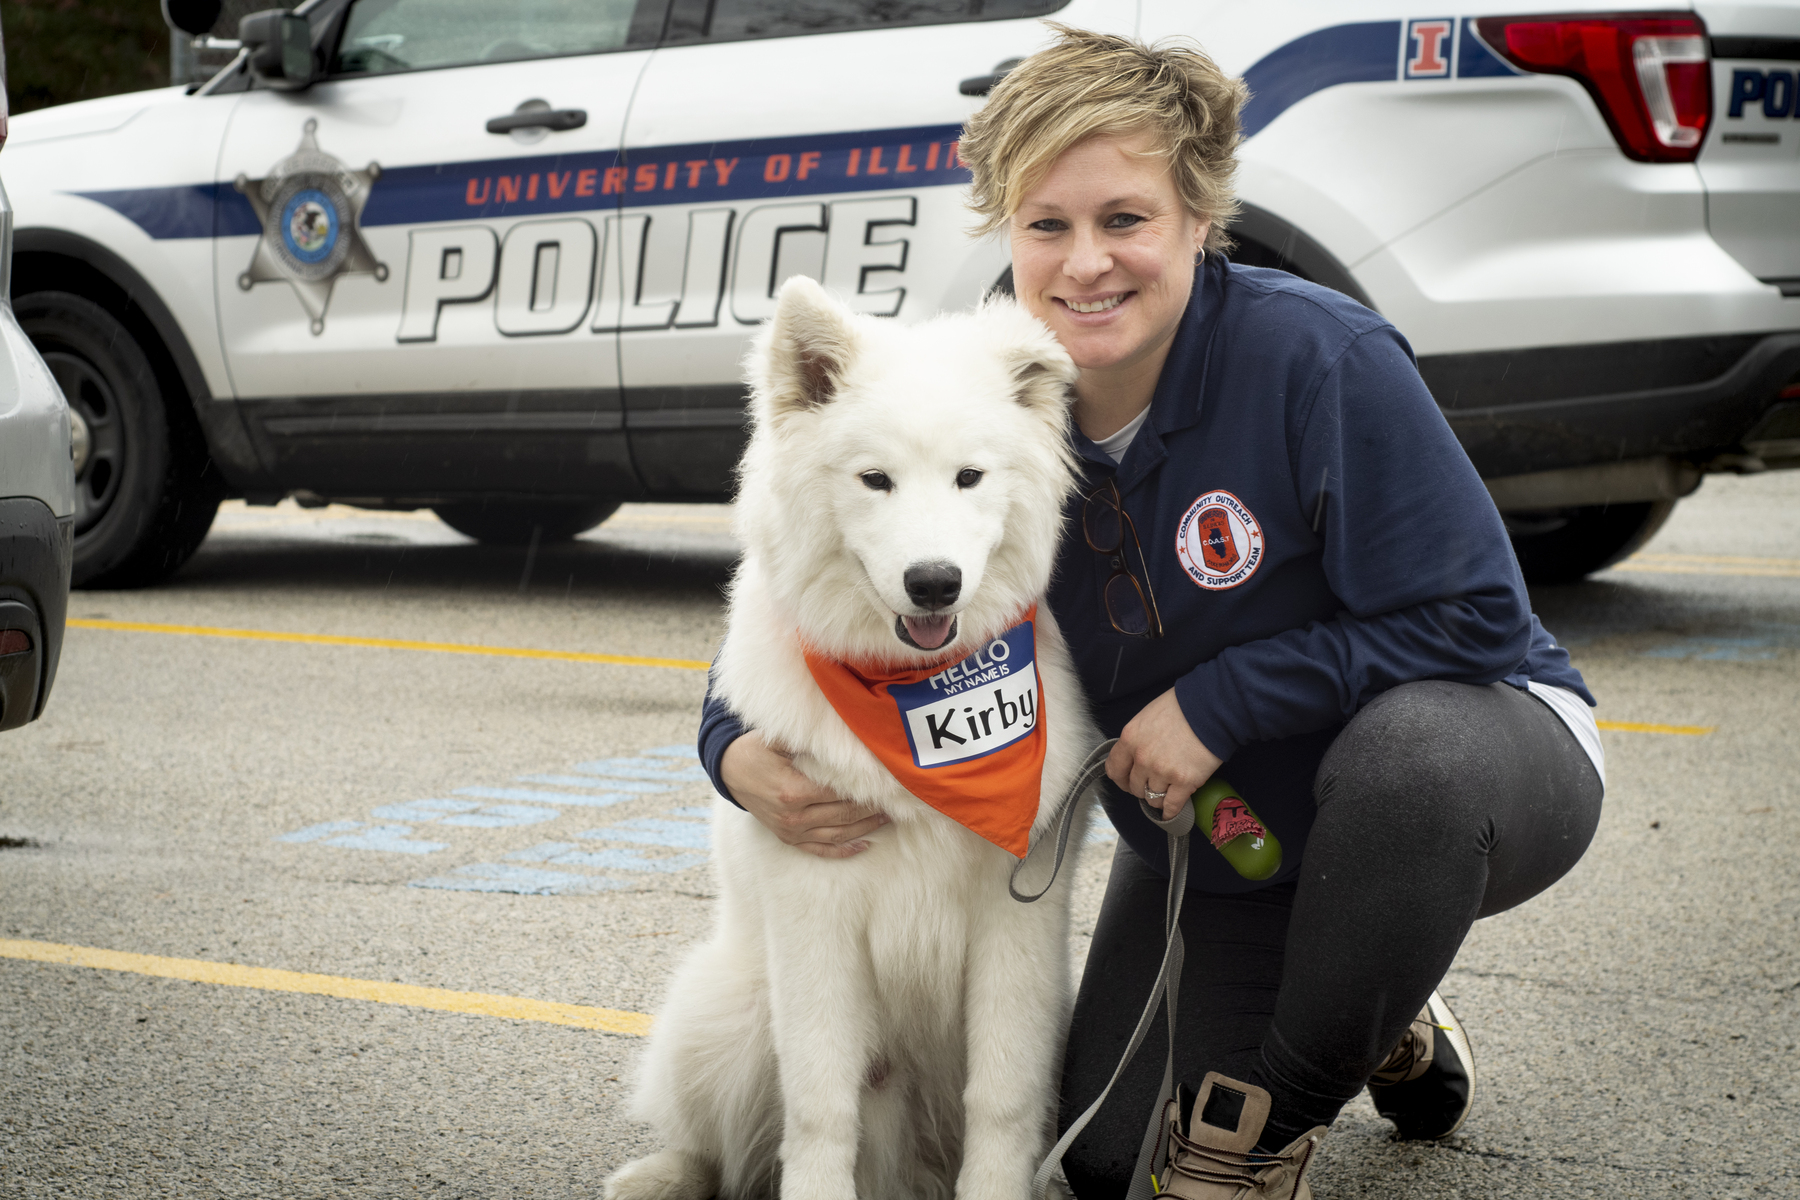 Detective Tara Hurless kneels beside Kirby, a fluffy white dog, in front of a University Police vehicle. The dog is wearing a bandana around his neck that says 